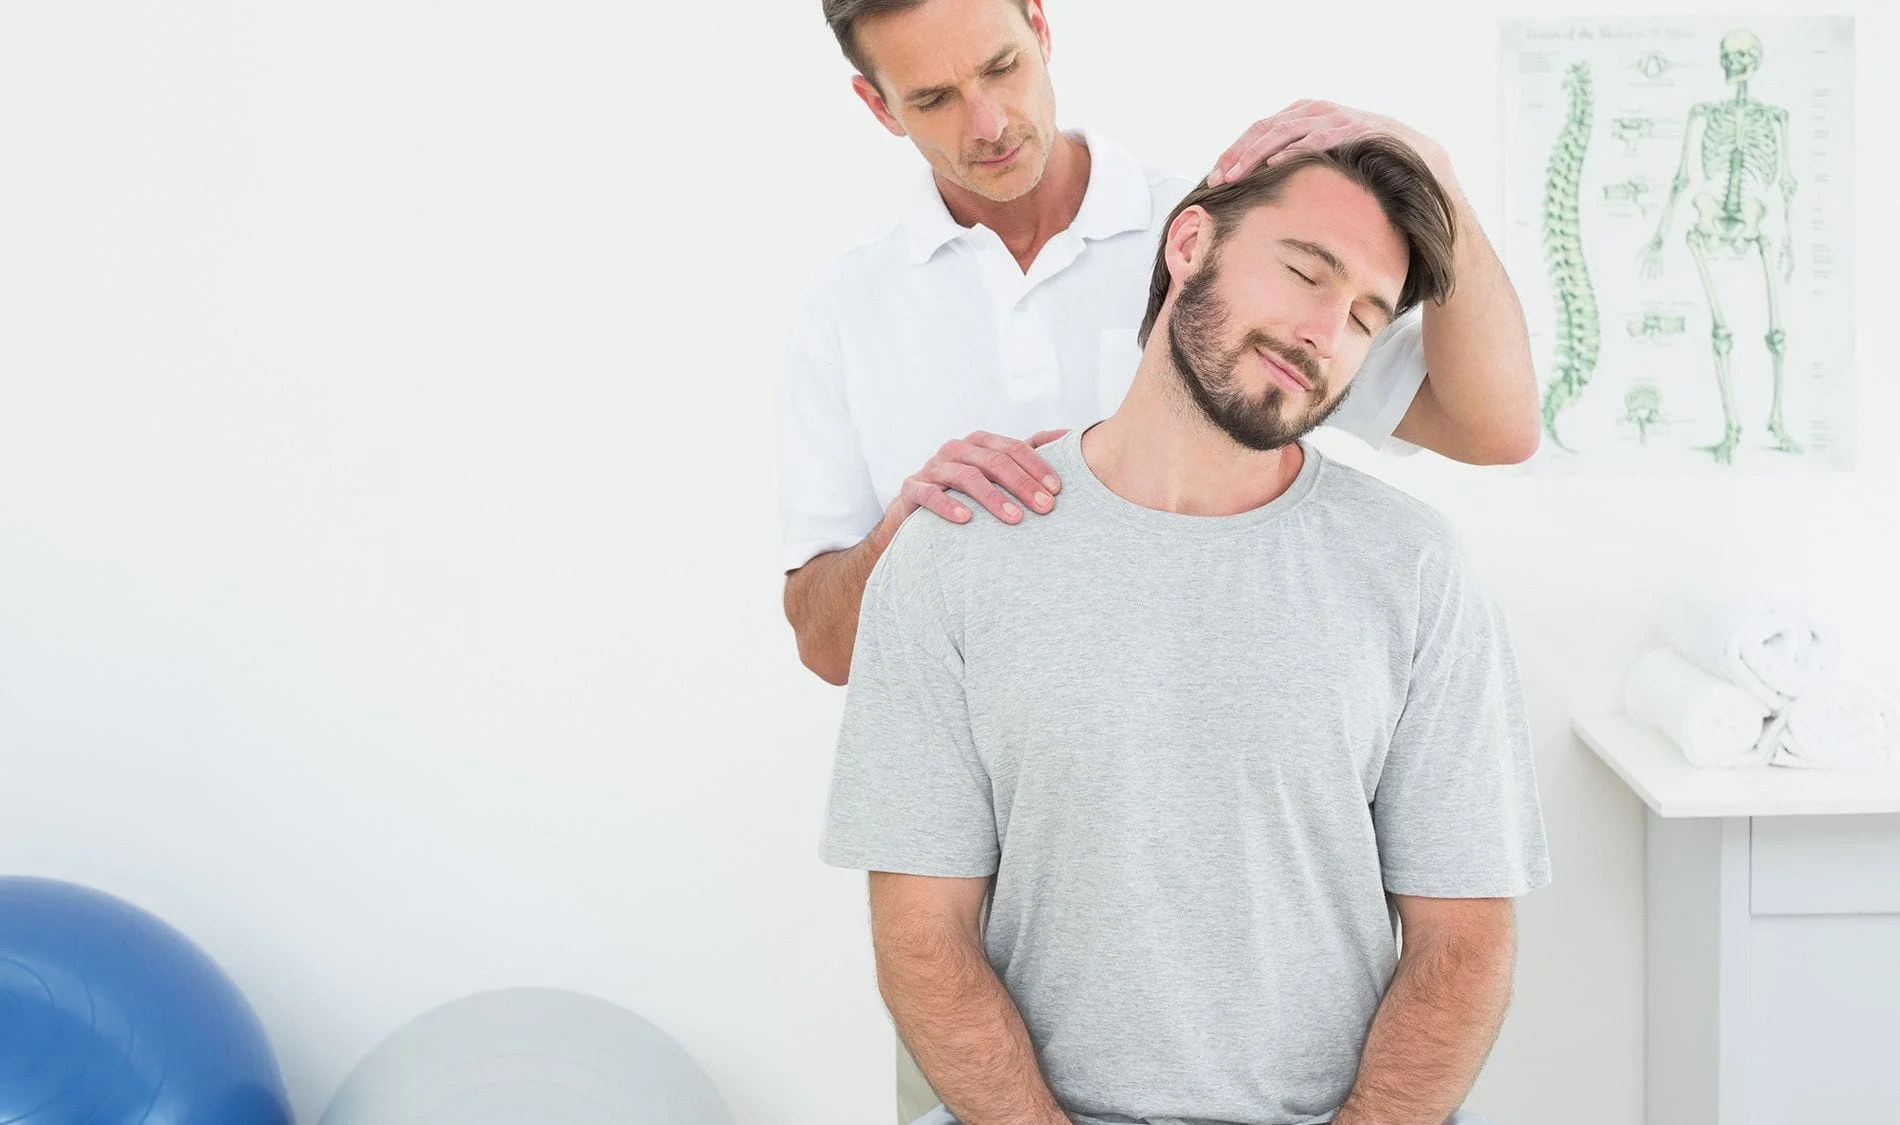 How Electric Muscle Stimulation Is Used by Chiropractors